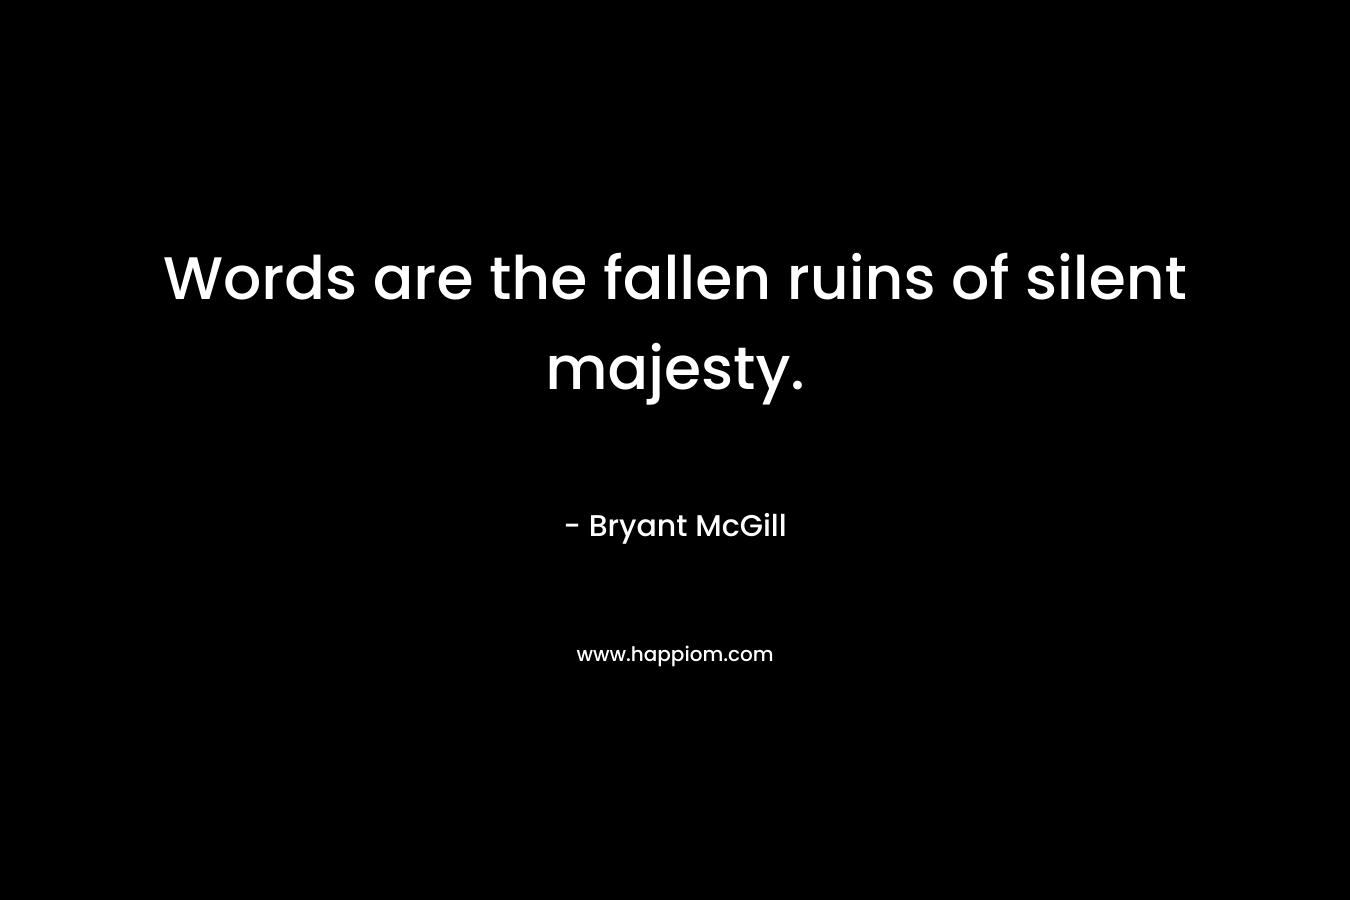 Words are the fallen ruins of silent majesty.